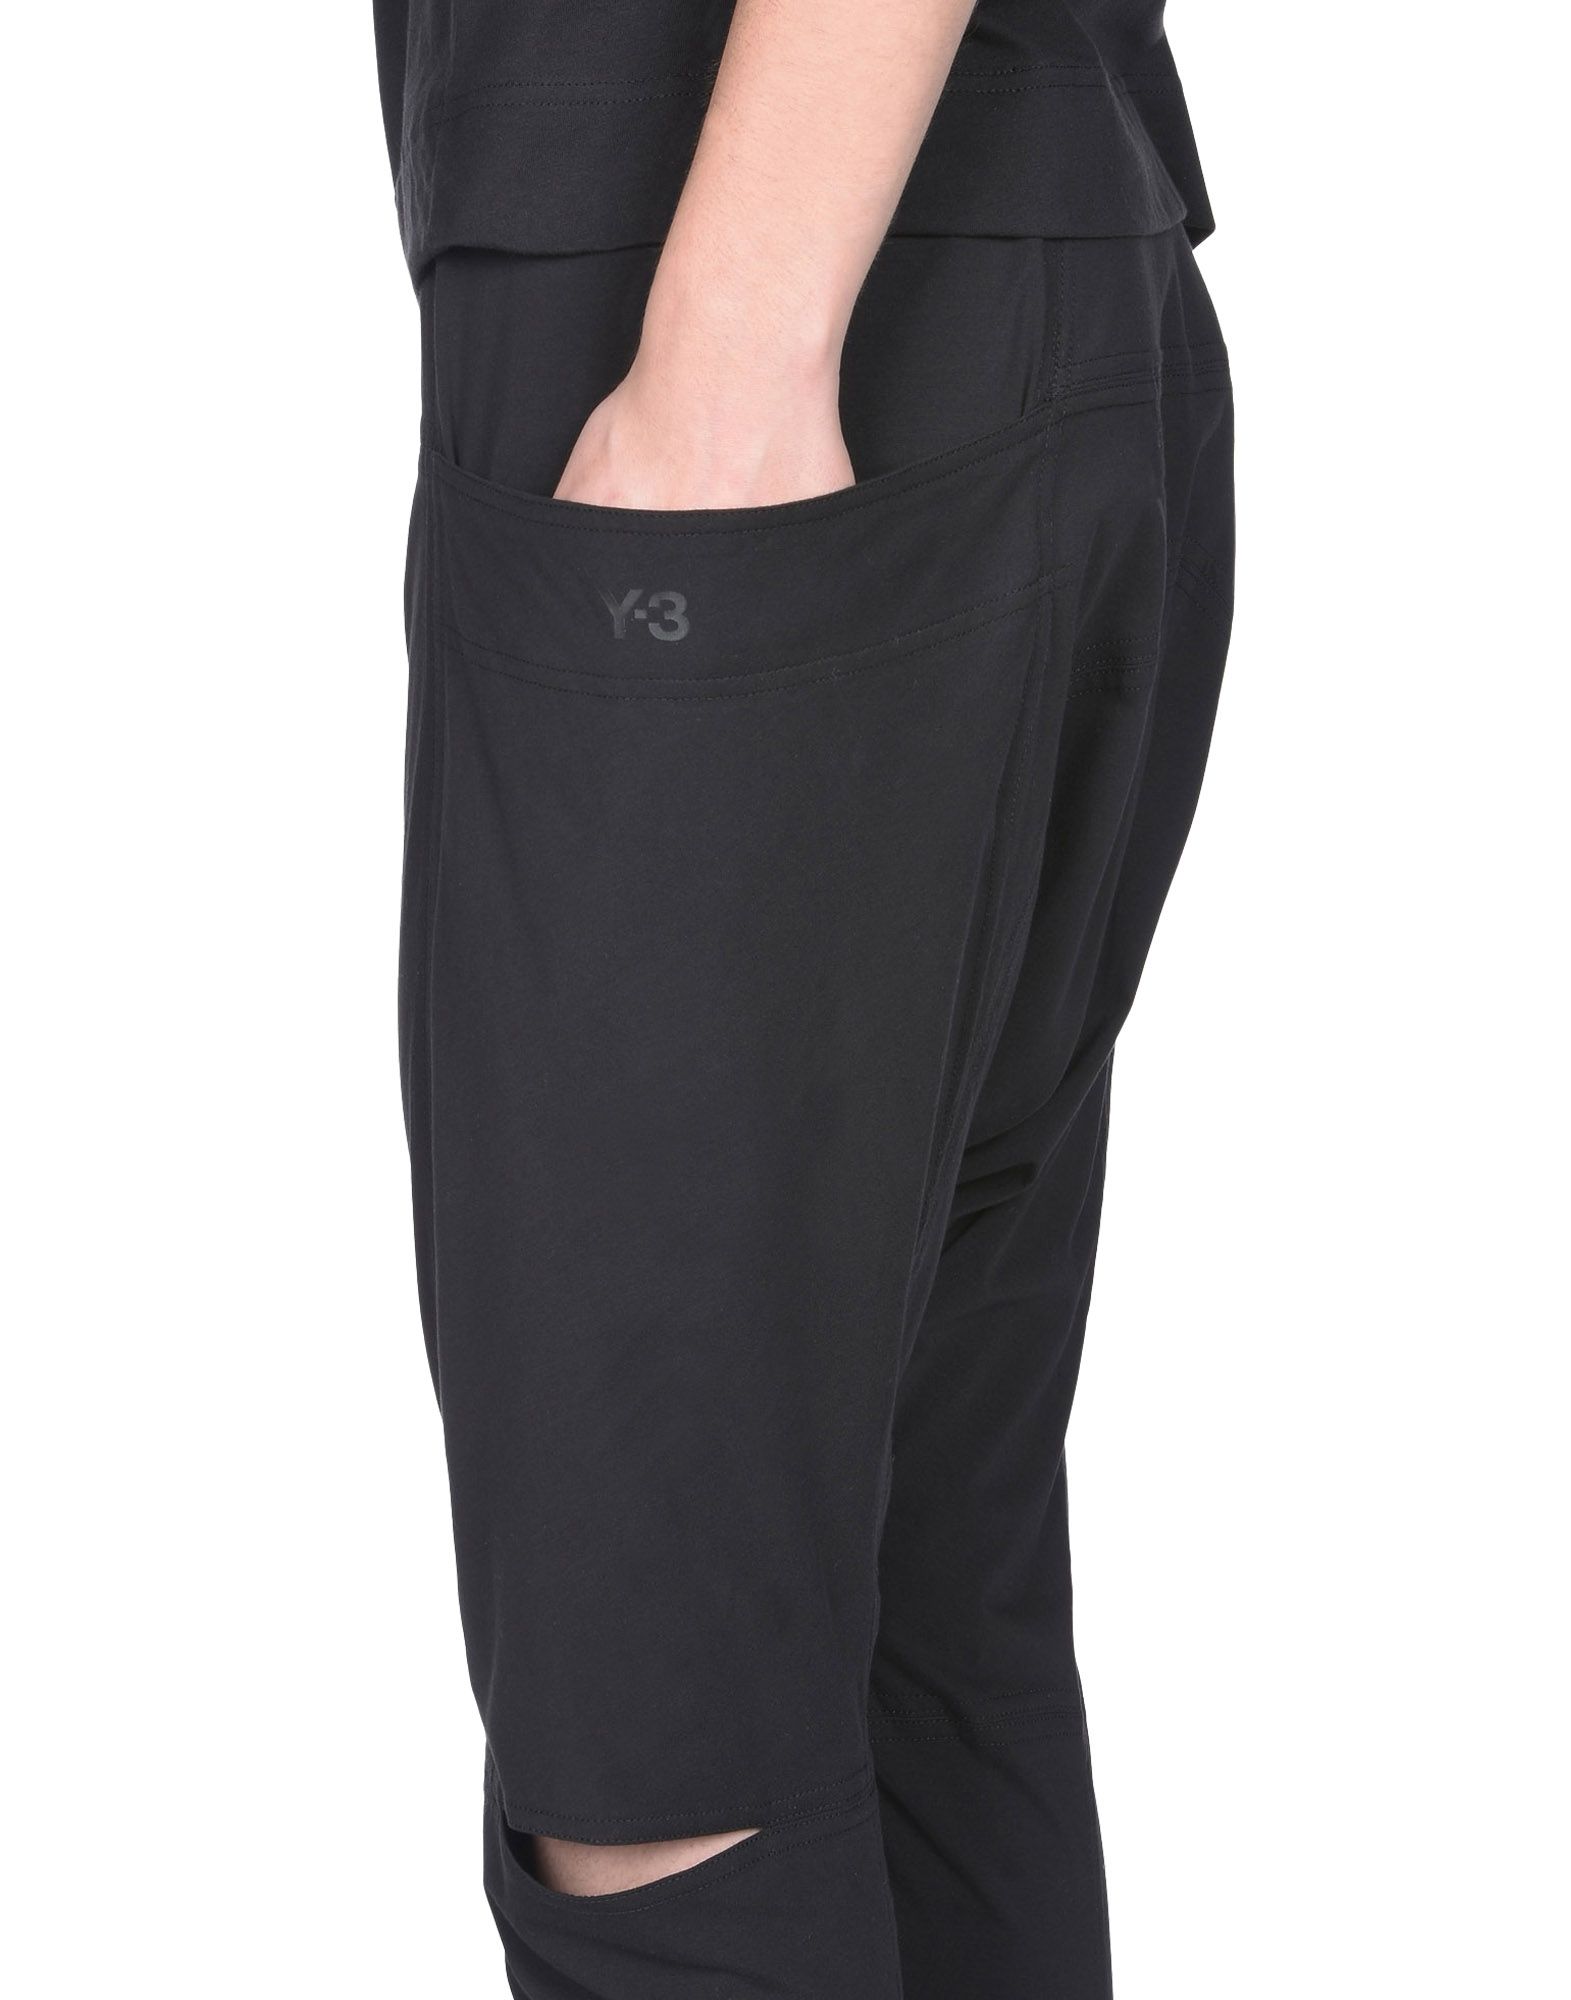 Y 3 JERSEY SAROUEL PANT for Women | Adidas Y-3 Official Store